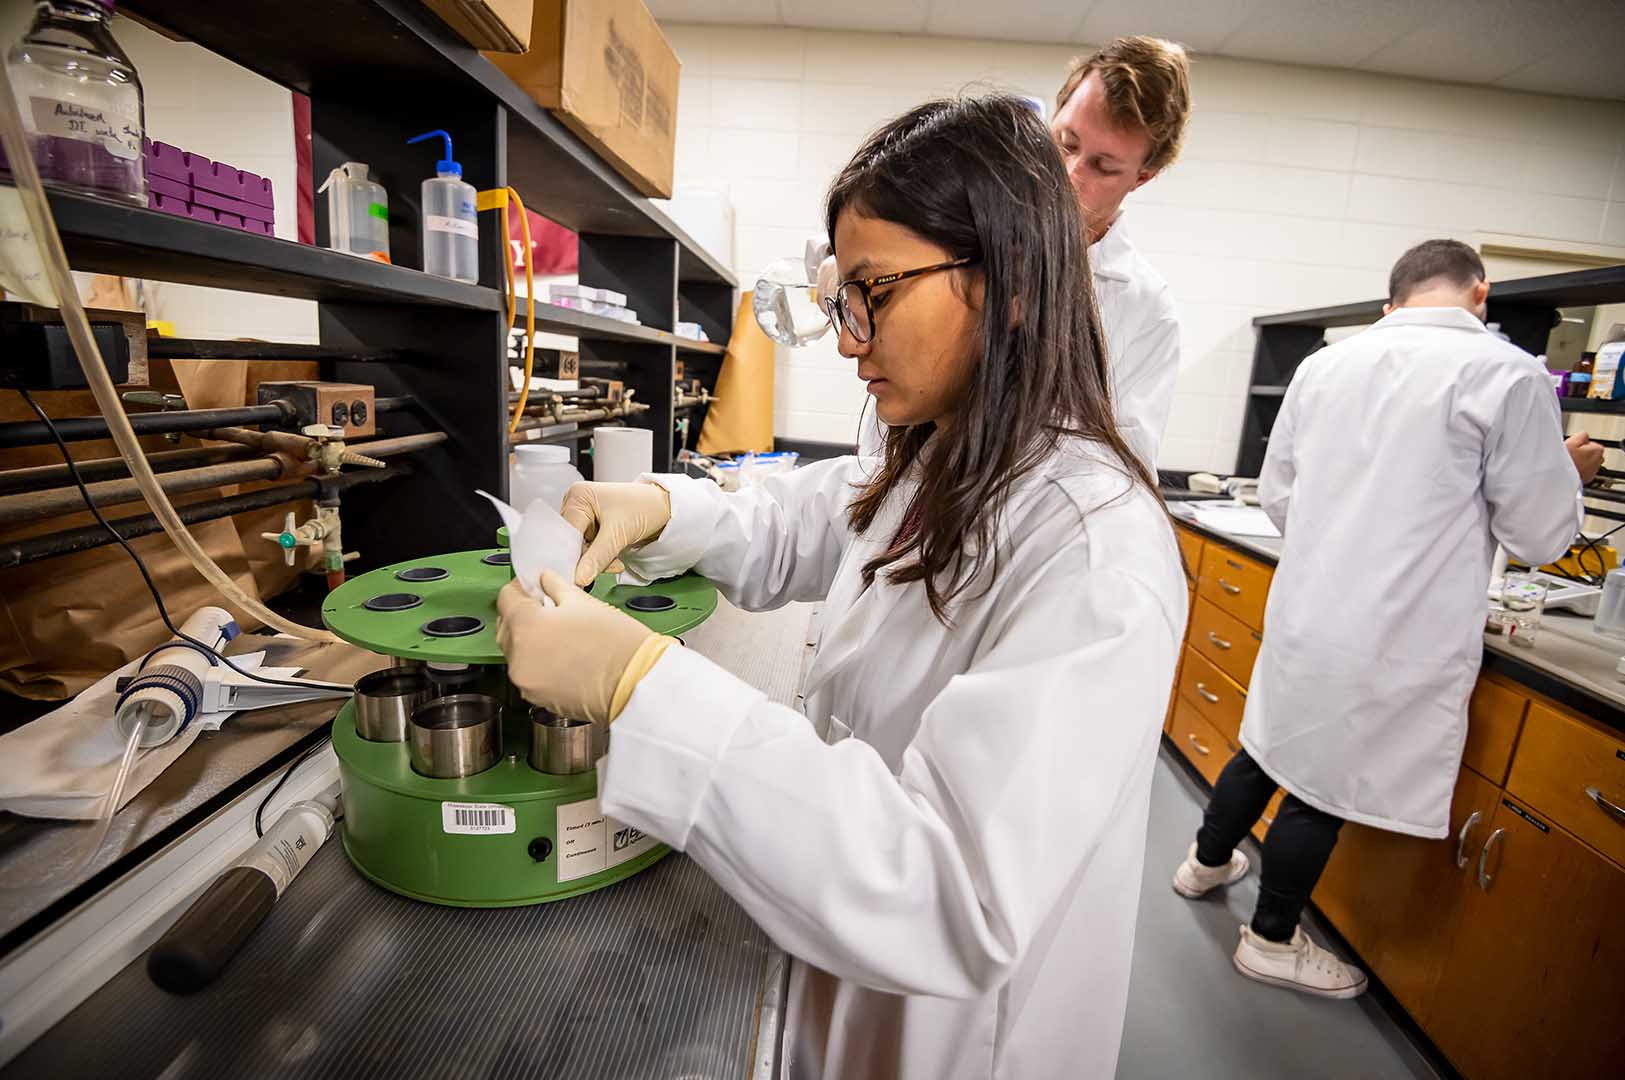 Students in the Soil Microbial Metagenomics Laboratory are measuring soil aggregate stability to understand the influence of cover crops on fungal biomass. (Photo by David Ammon